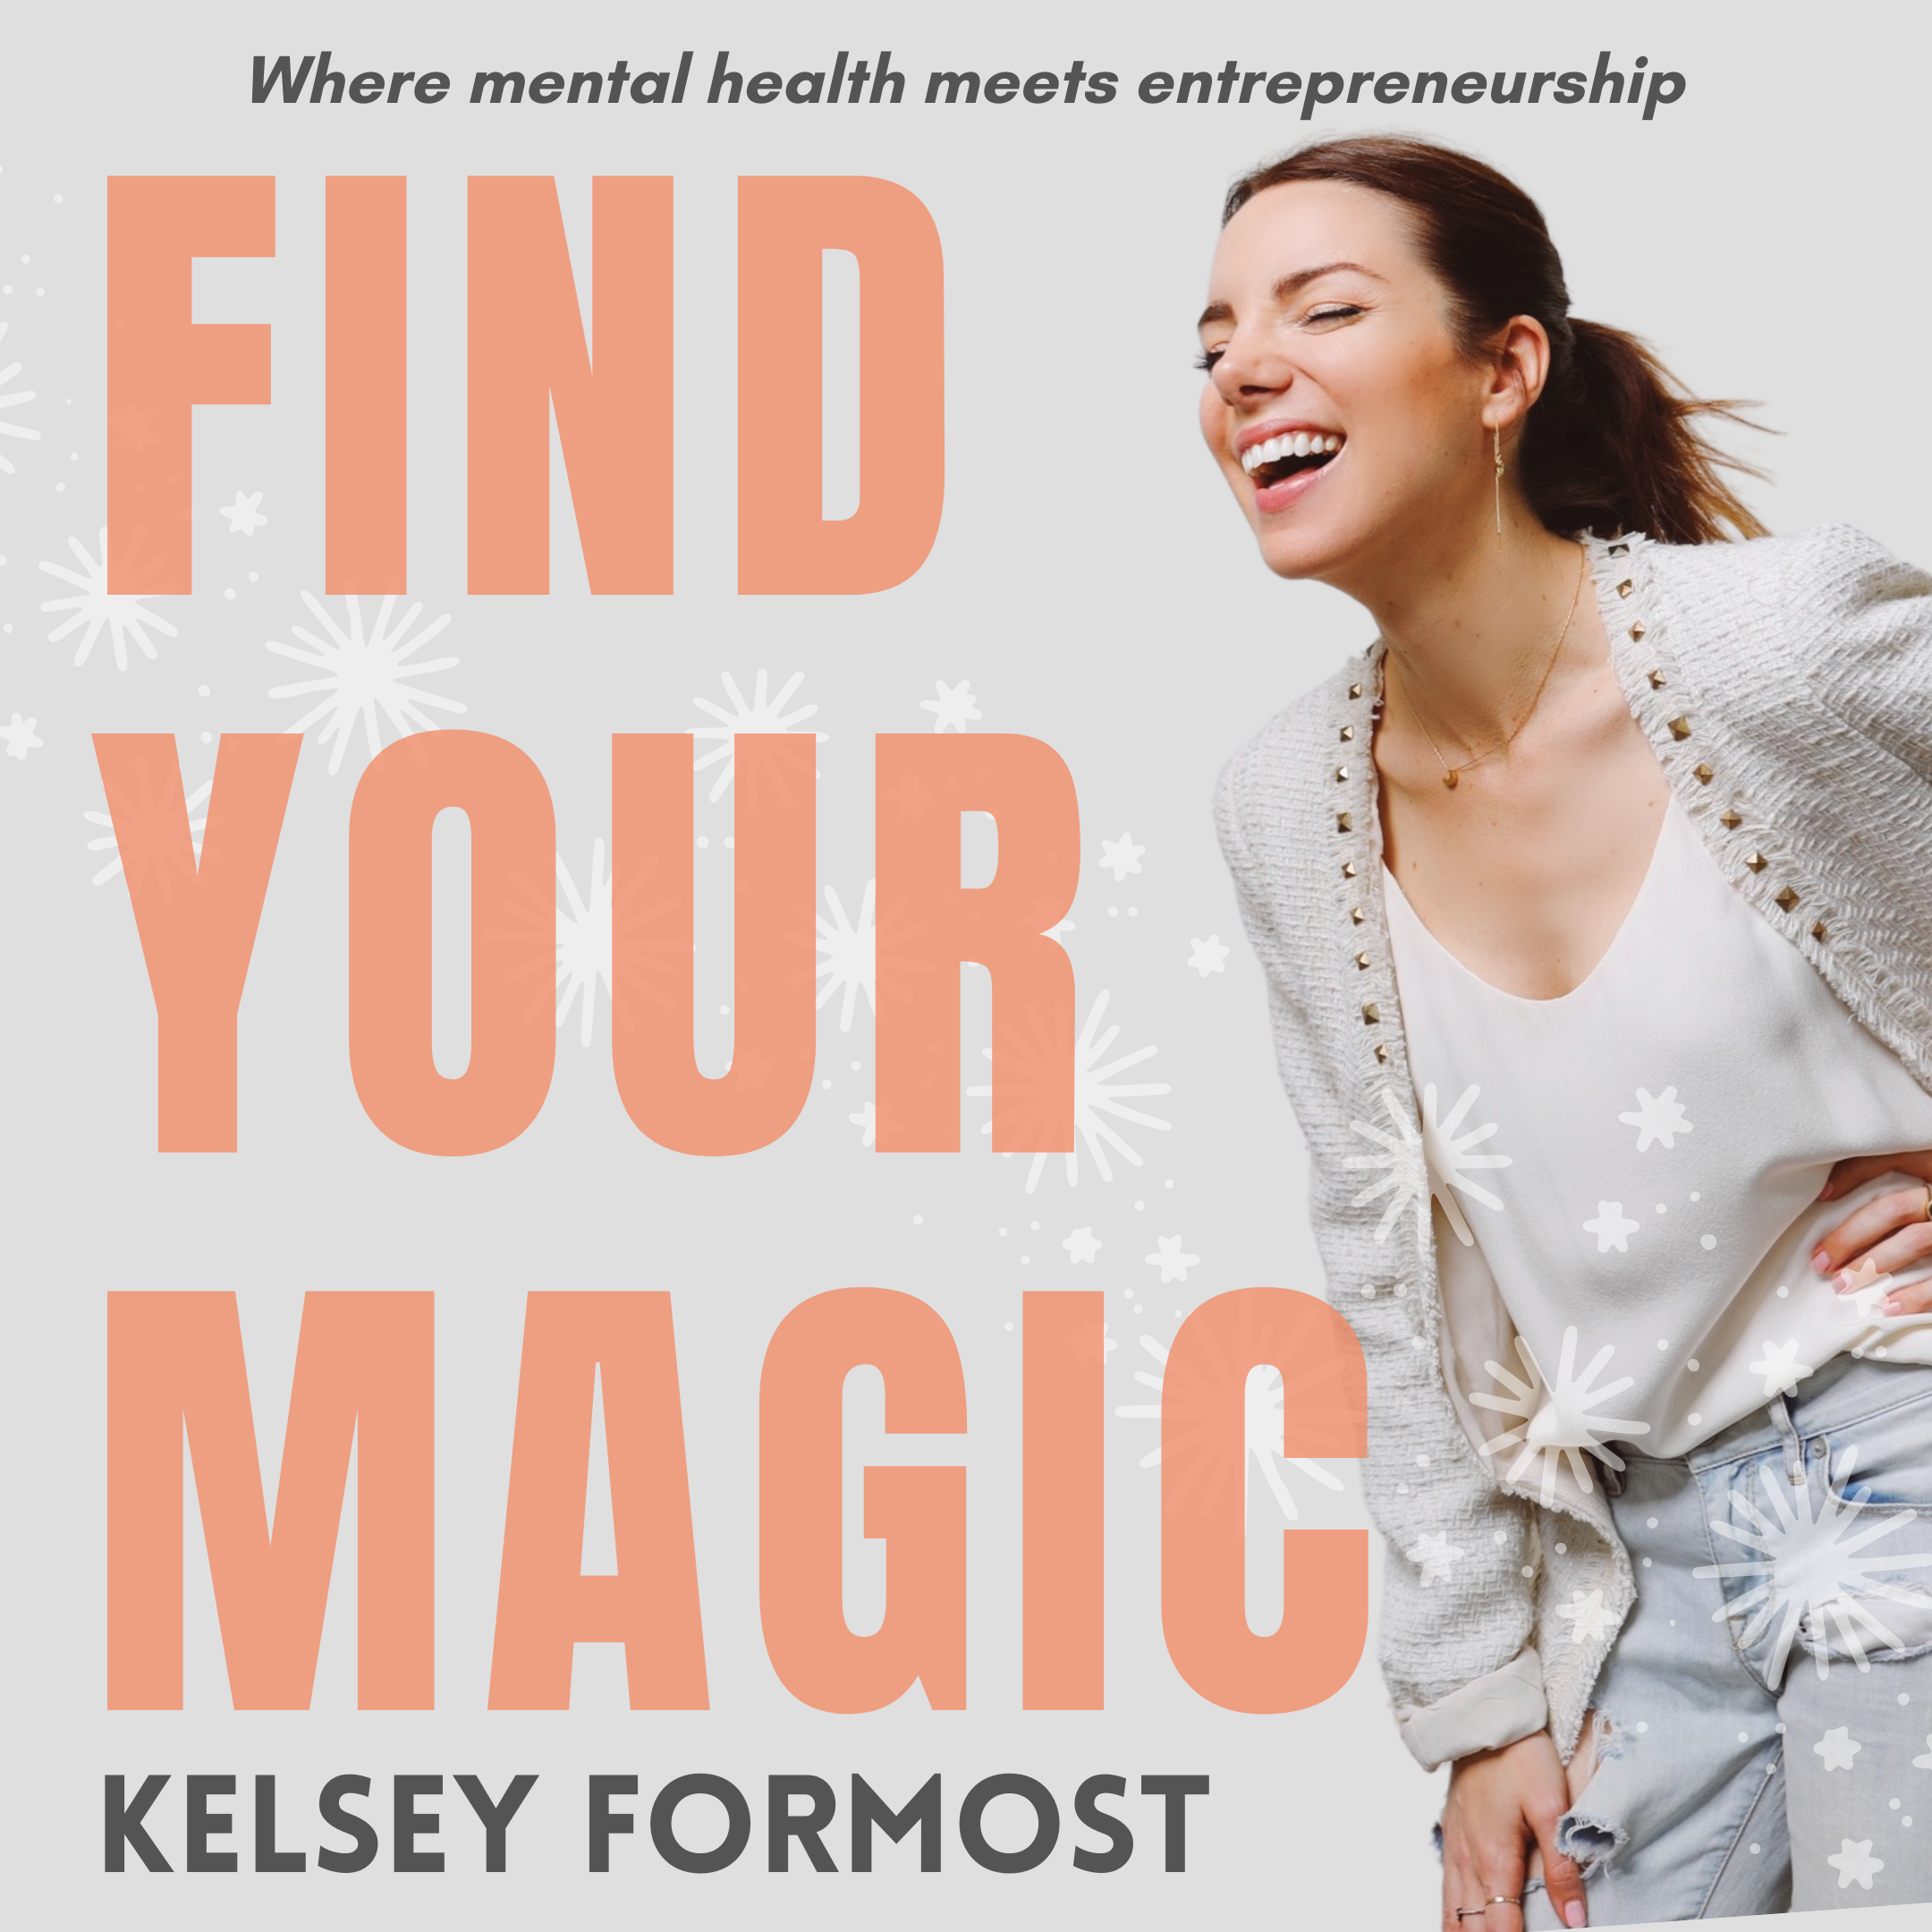 Cover art for "Find Your Magic" podcast with Kelsey Formost